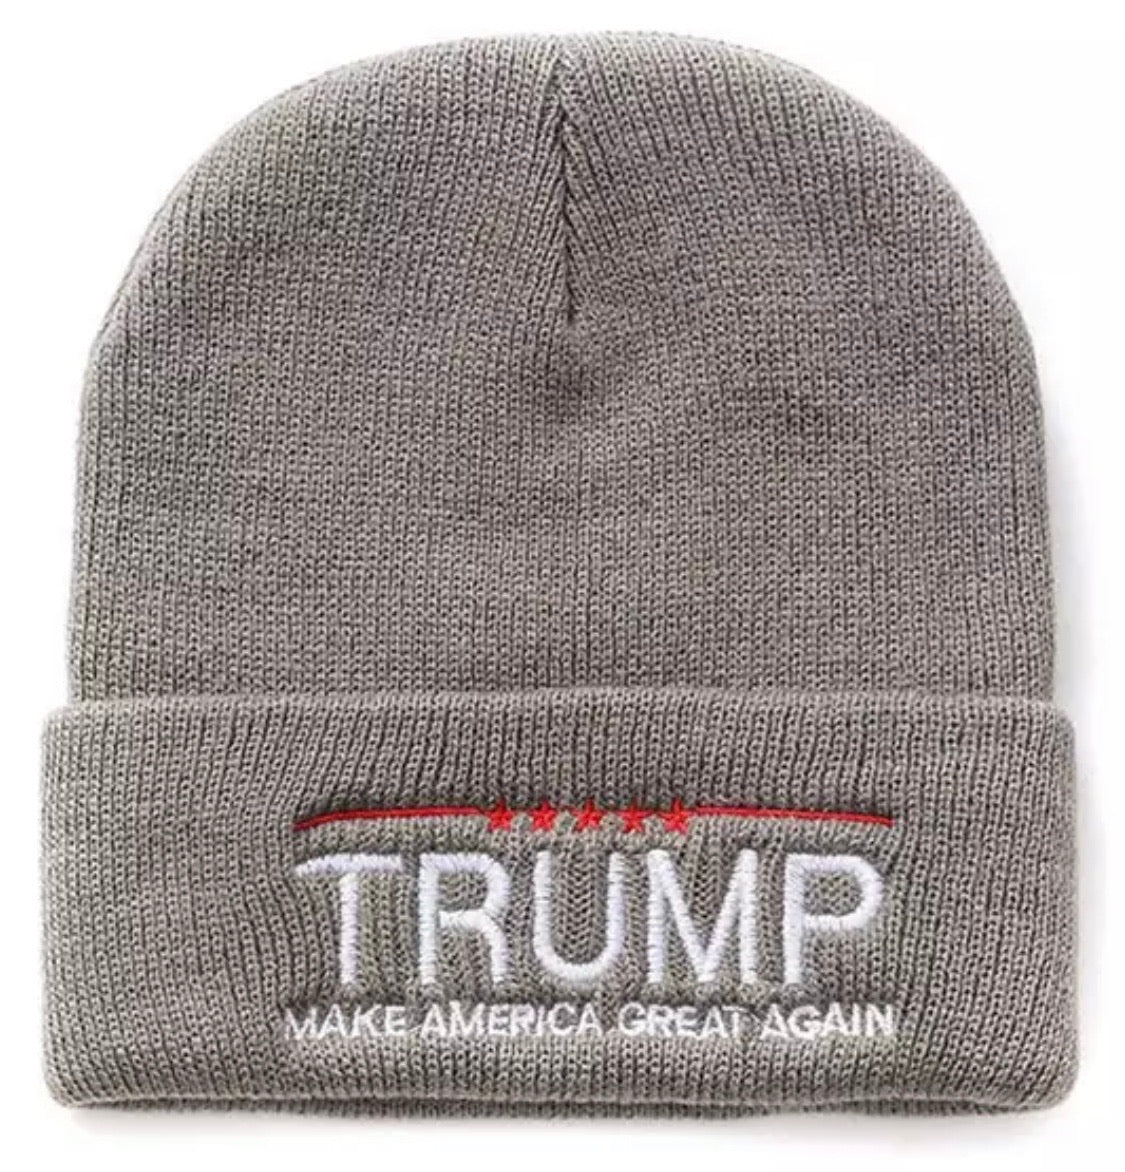 Hats { Trump } Make America Great Again. Embroidered. 4 colors. Black, red, dark gray, light gray. Knit unisex beanie. - Stacy's Pink Martini Boutique